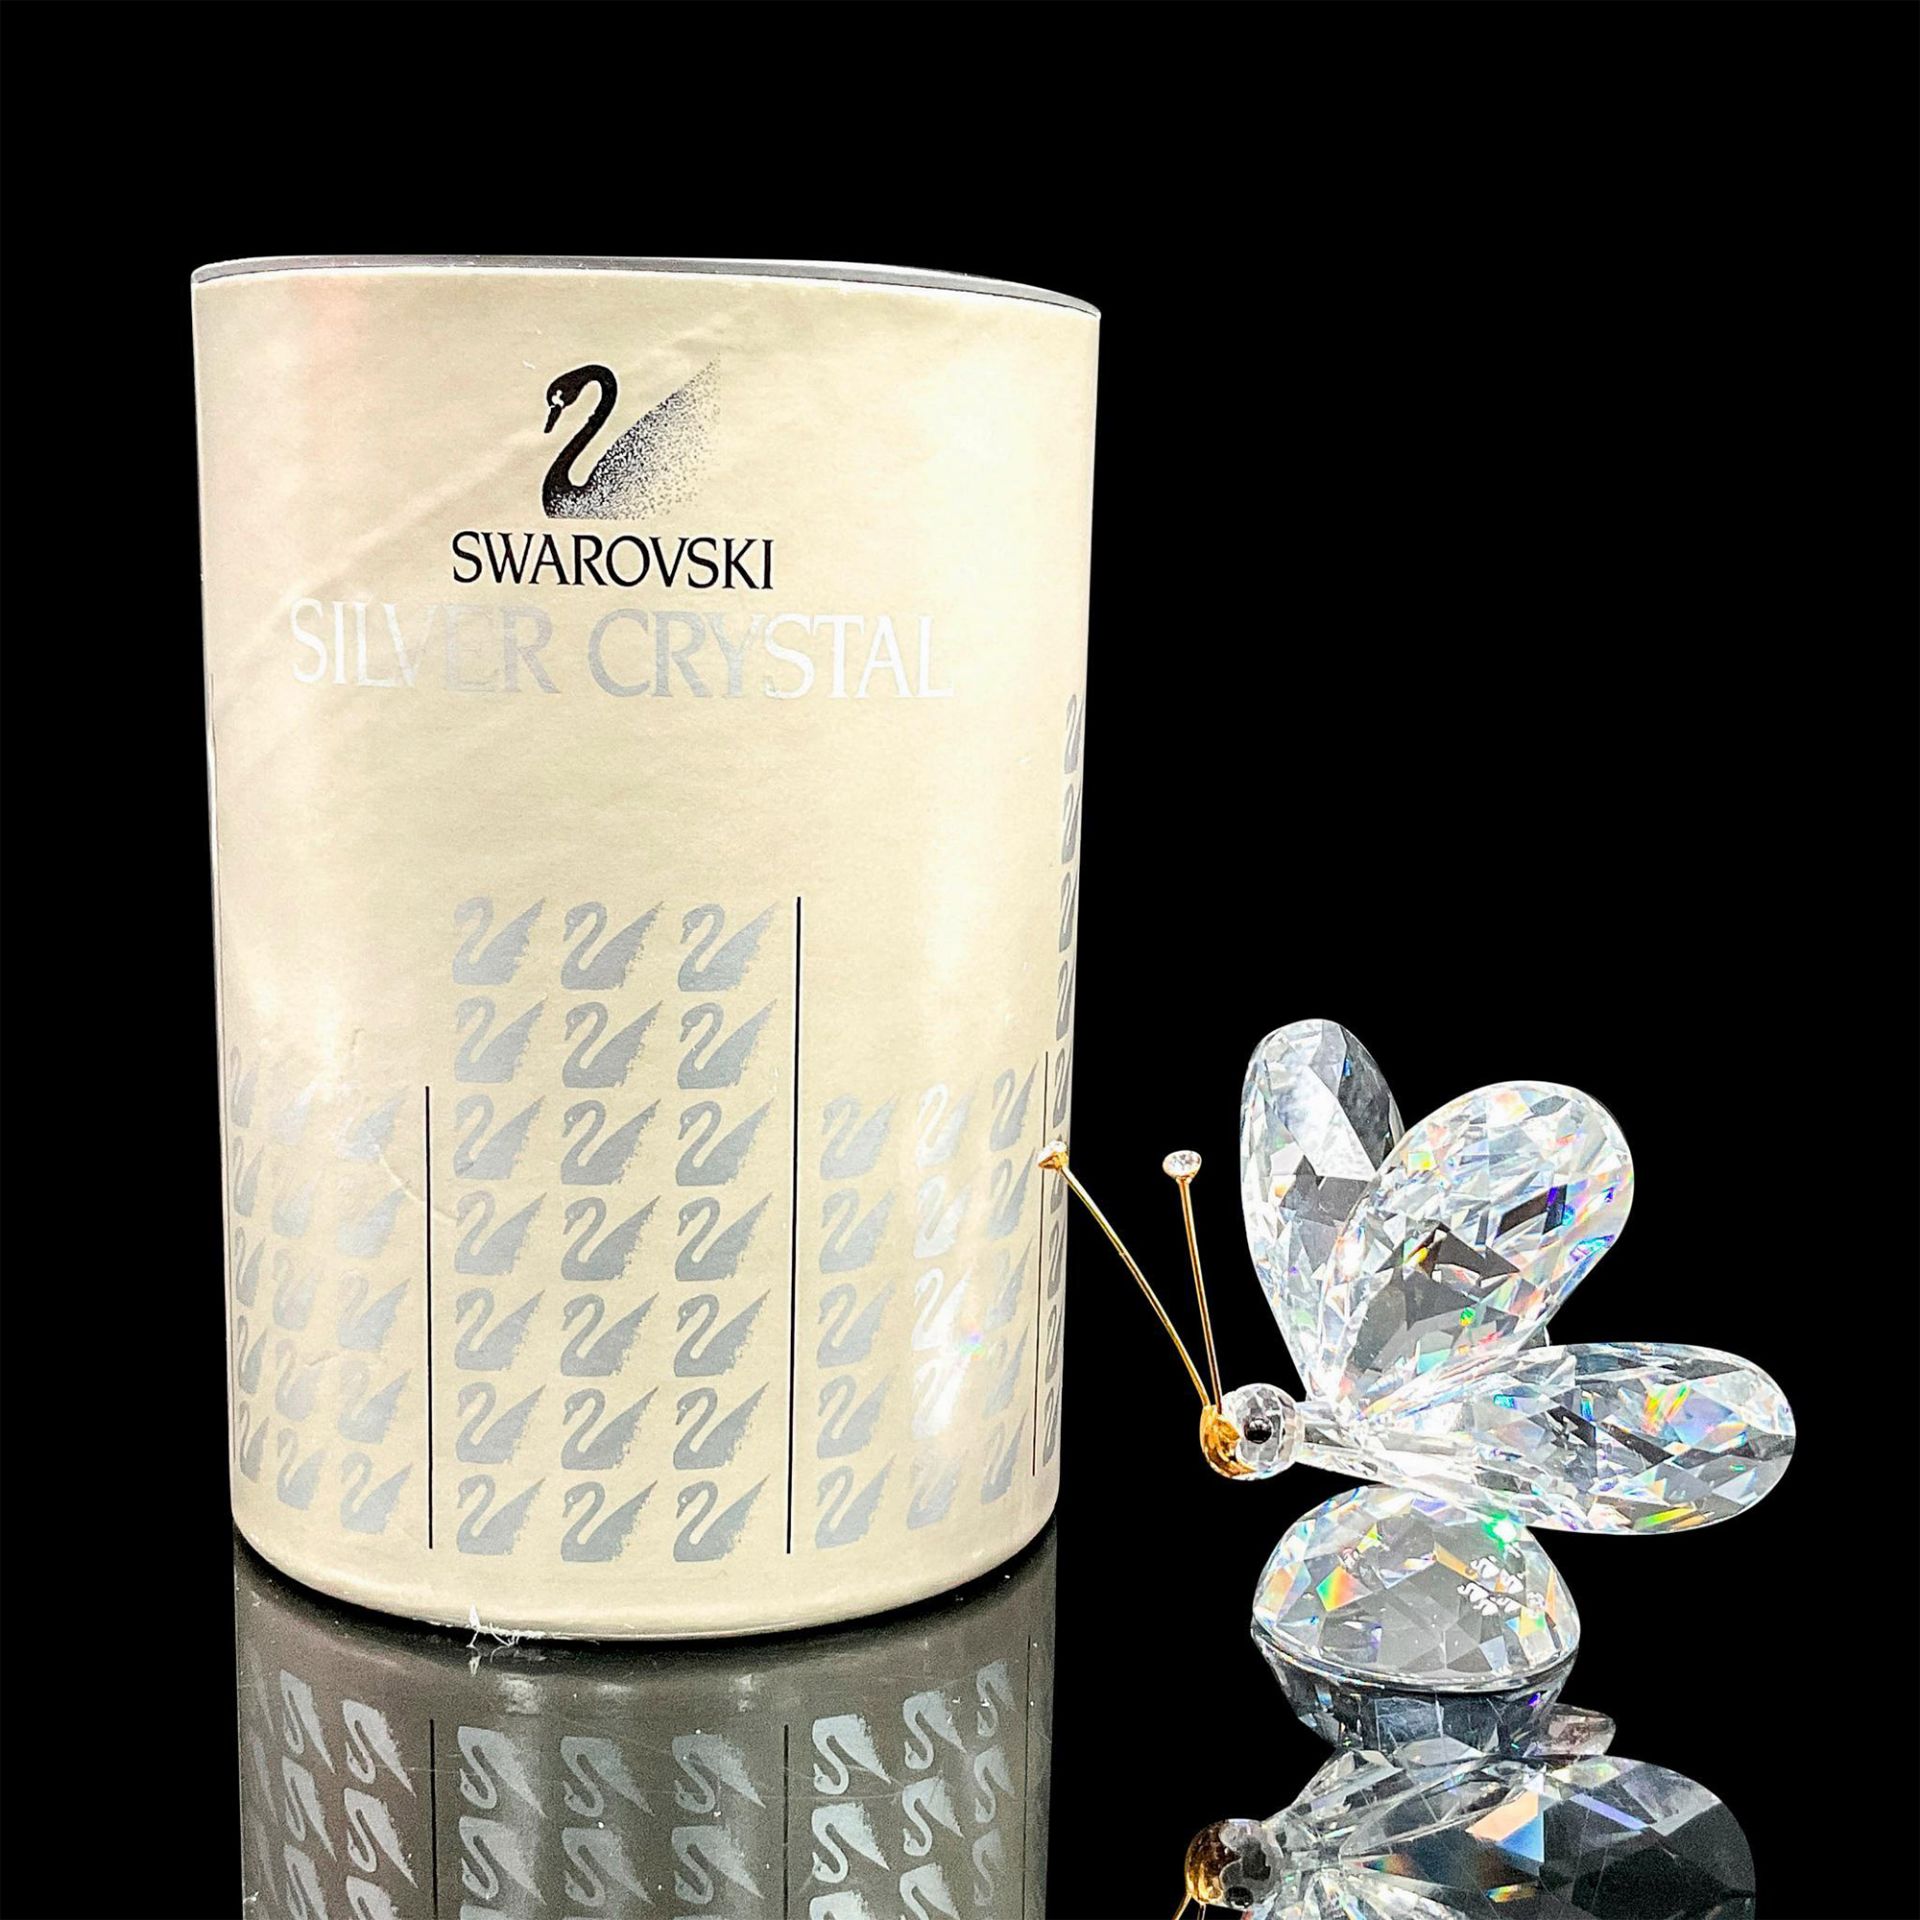 Swarovski Crystal Figurine, Butterfly with Gold Antennae - Image 5 of 5